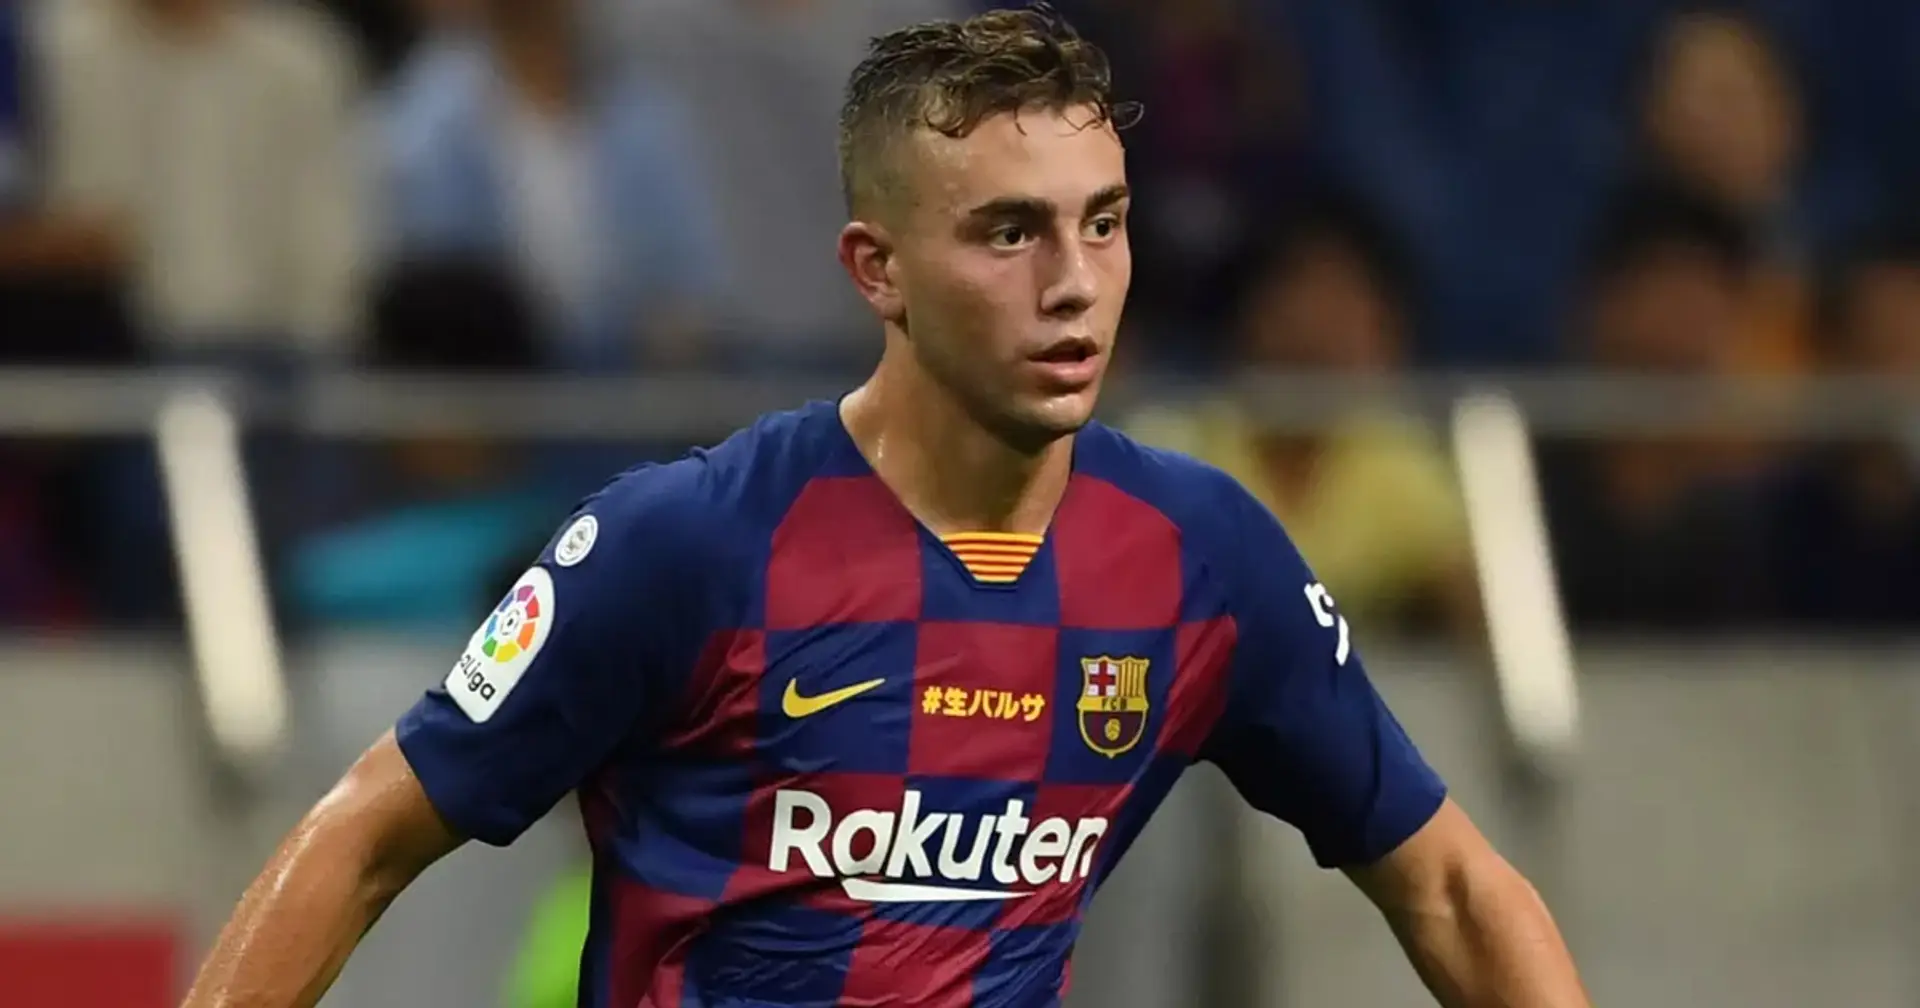 Talented youngster Oriol Busquets 'determined' to break into Barcelona's first team next season